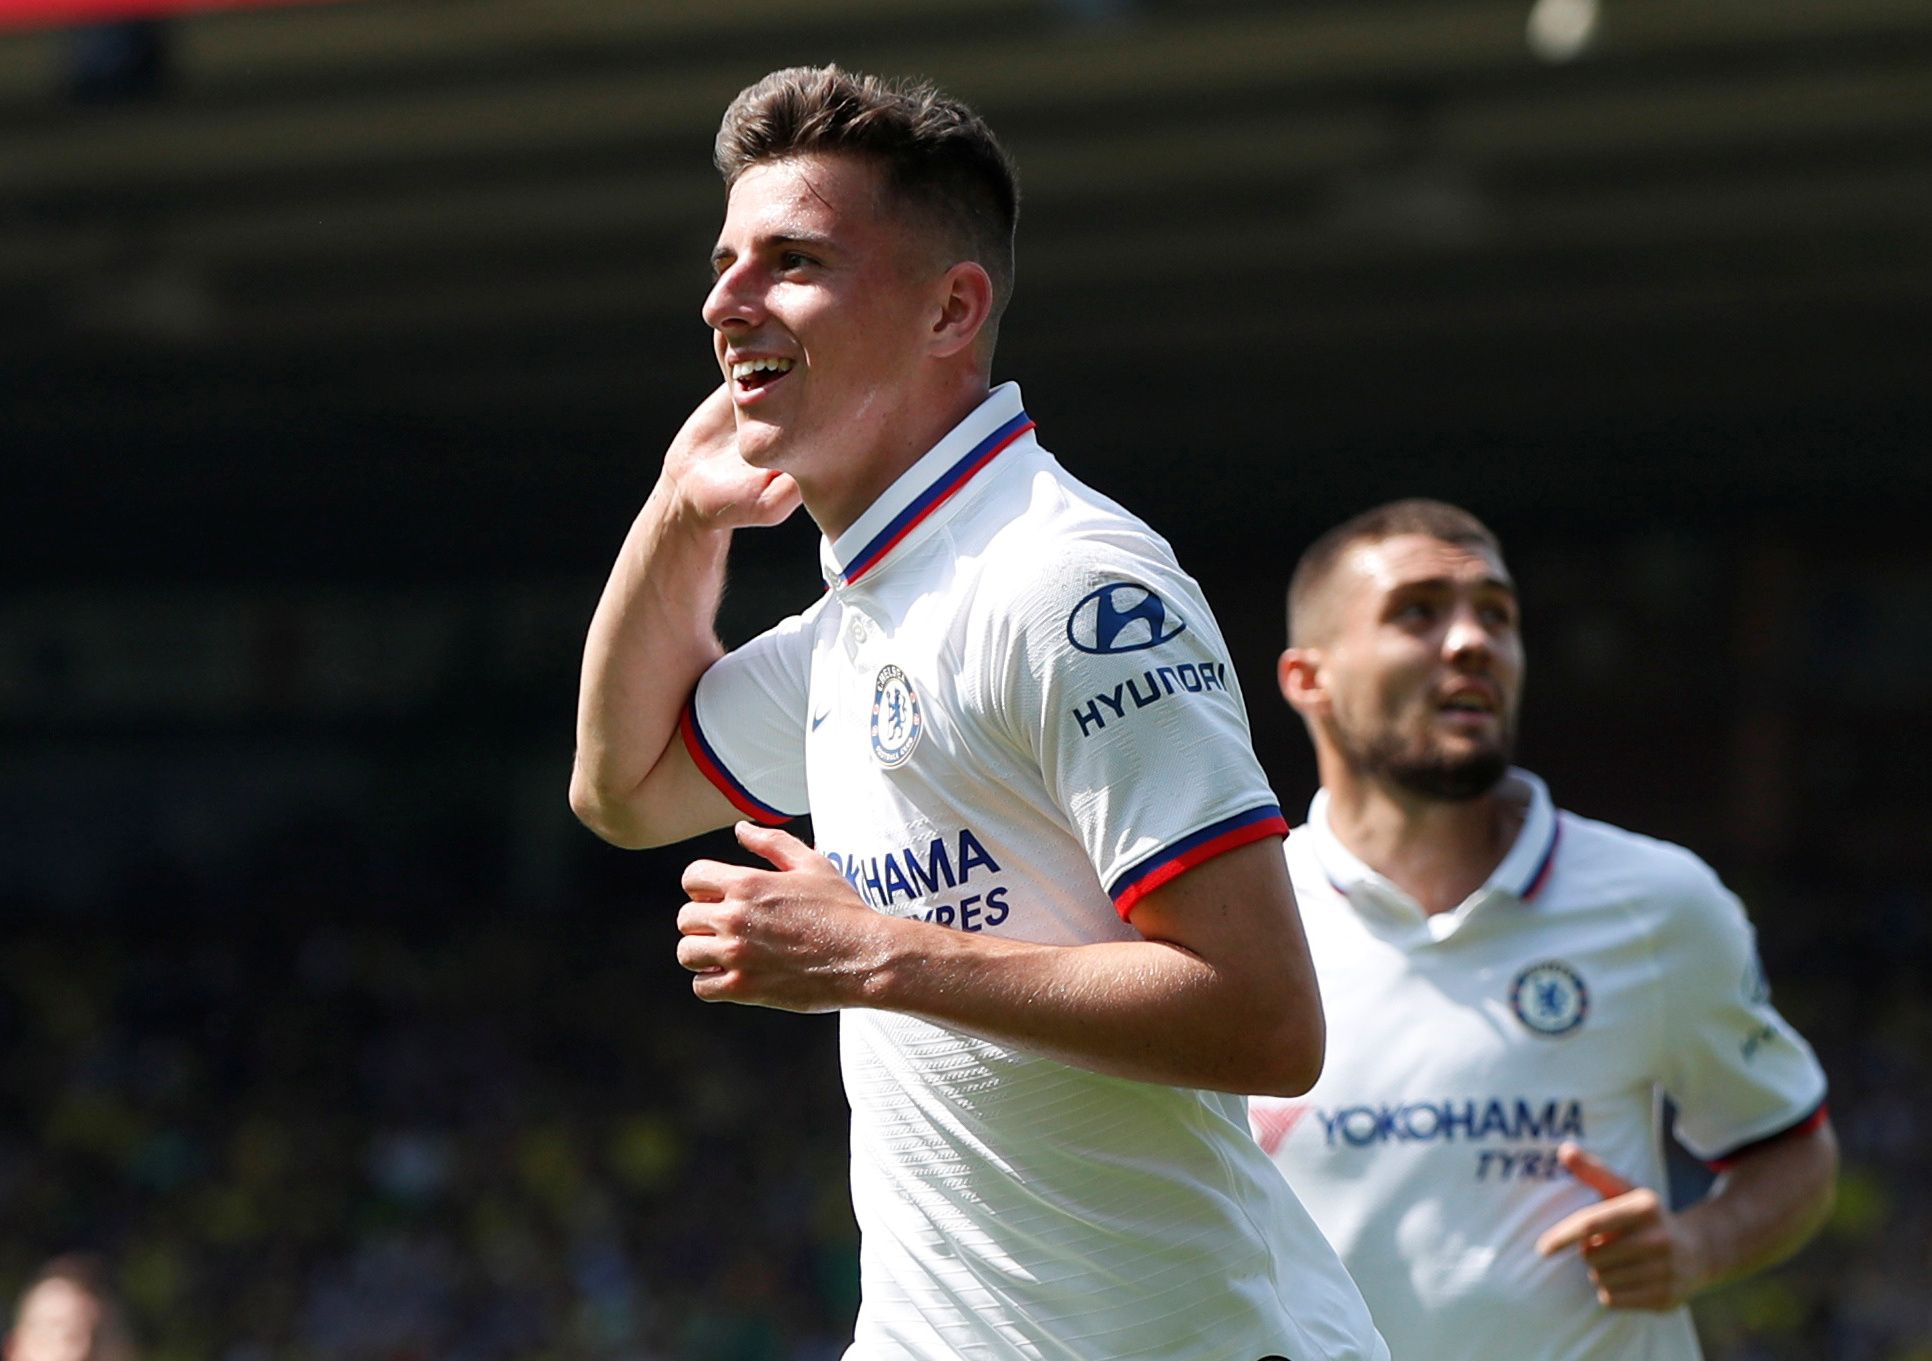 Soccer Football - Premier League - Norwich City v Chelsea - Carrow Road, Norwich, Britain - August 24, 2019  Chelsea's Mason Mount celebrates scoring their second goal               Action Images via Reuters/John Sibley  EDITORIAL USE ONLY. No use with unauthorized audio, video, data, fixture lists, club/league logos or 